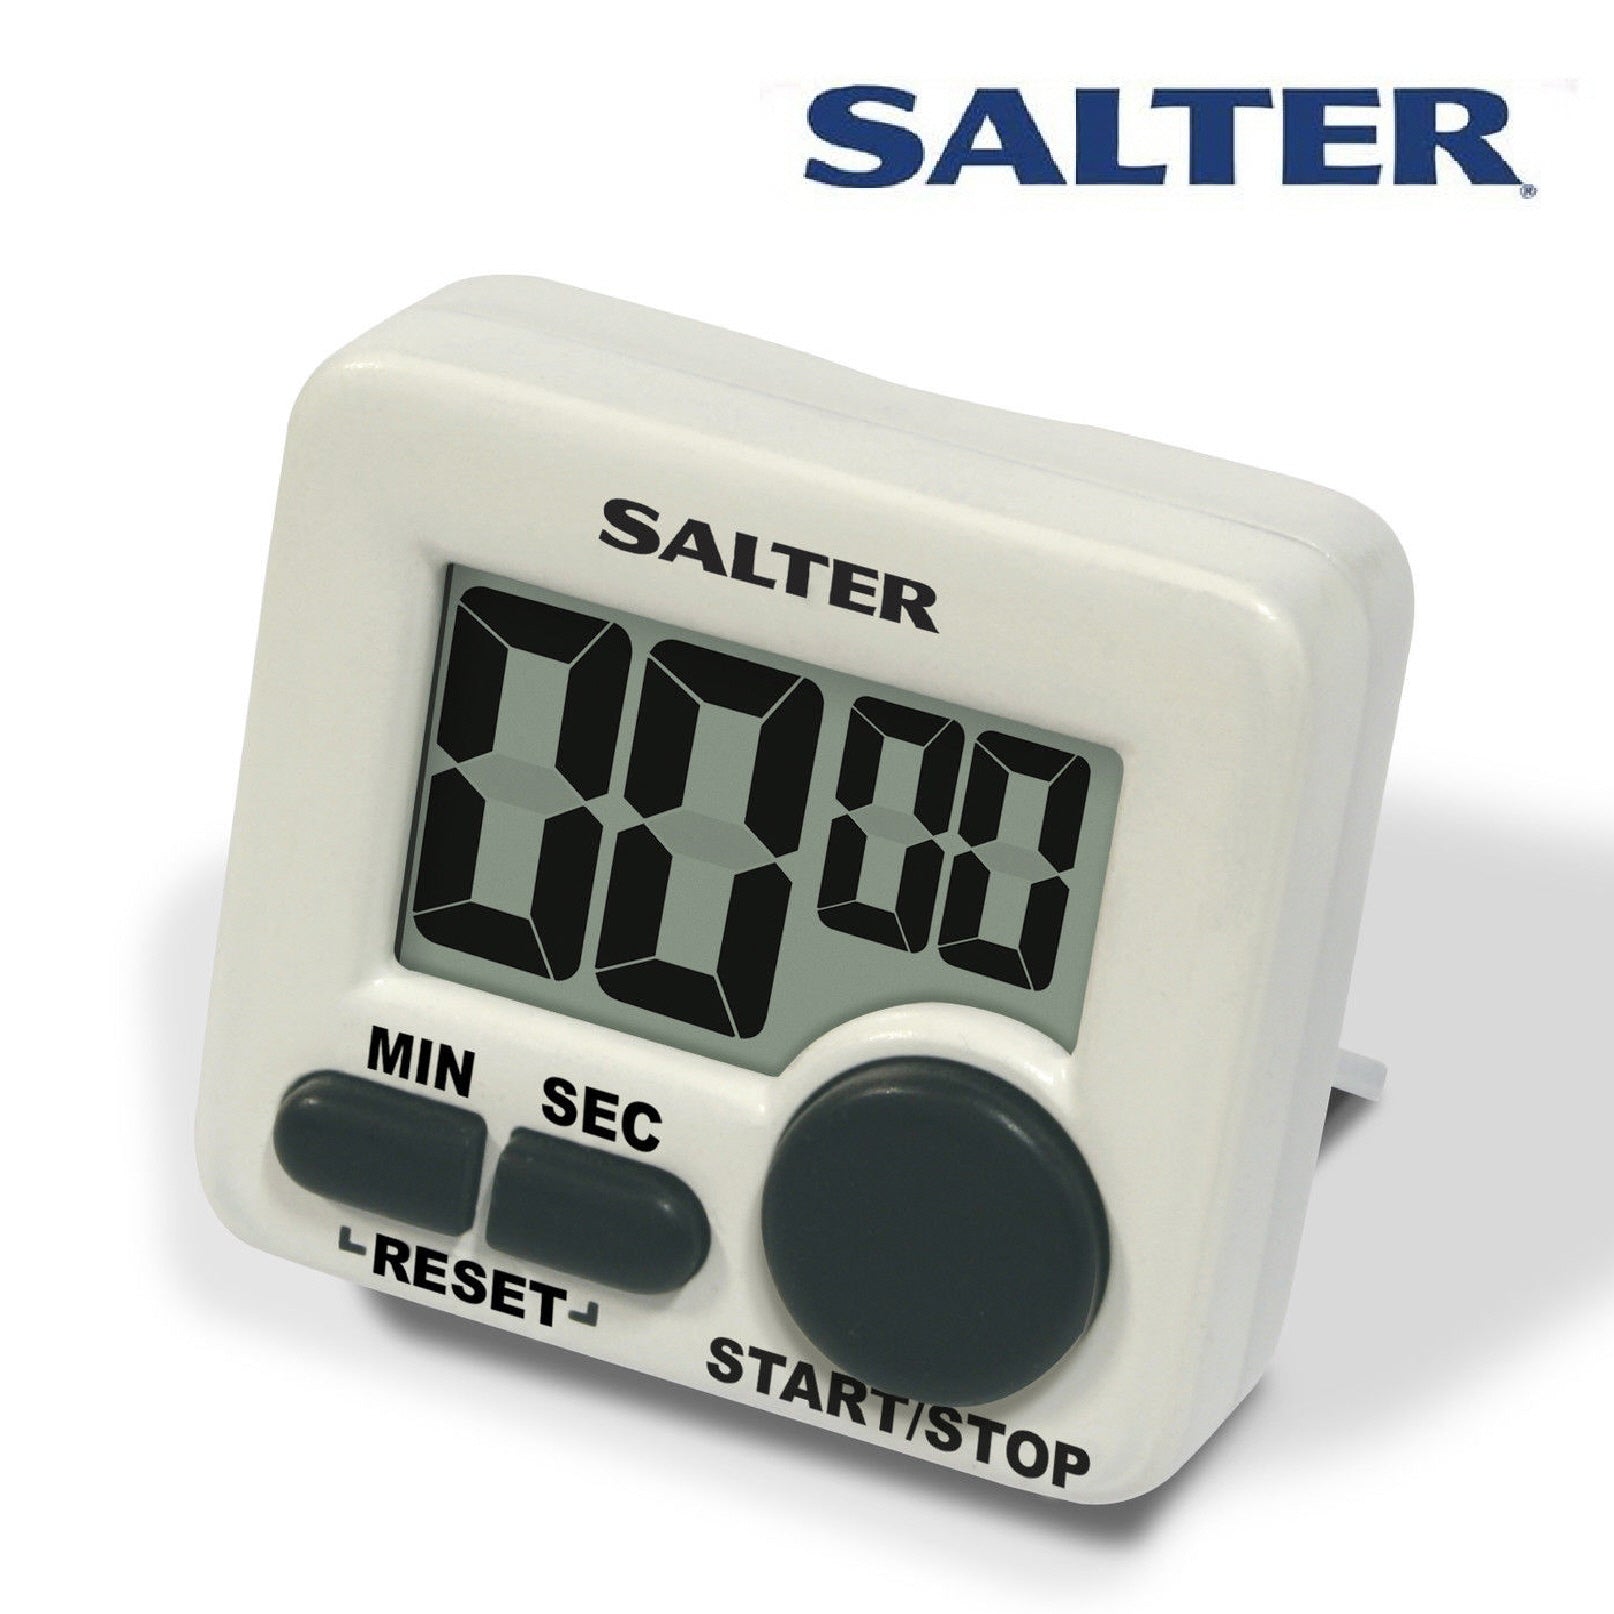 https://cdn.shopify.com/s/files/1/0553/9501/products/Salter_Digital_Cooking_Mini_Timer_for_Kitchen_Magnetic_or_Free_Standing_ebcc283b-881c-475f-aa10-2b006bc1c709.jpg?v=1533119970